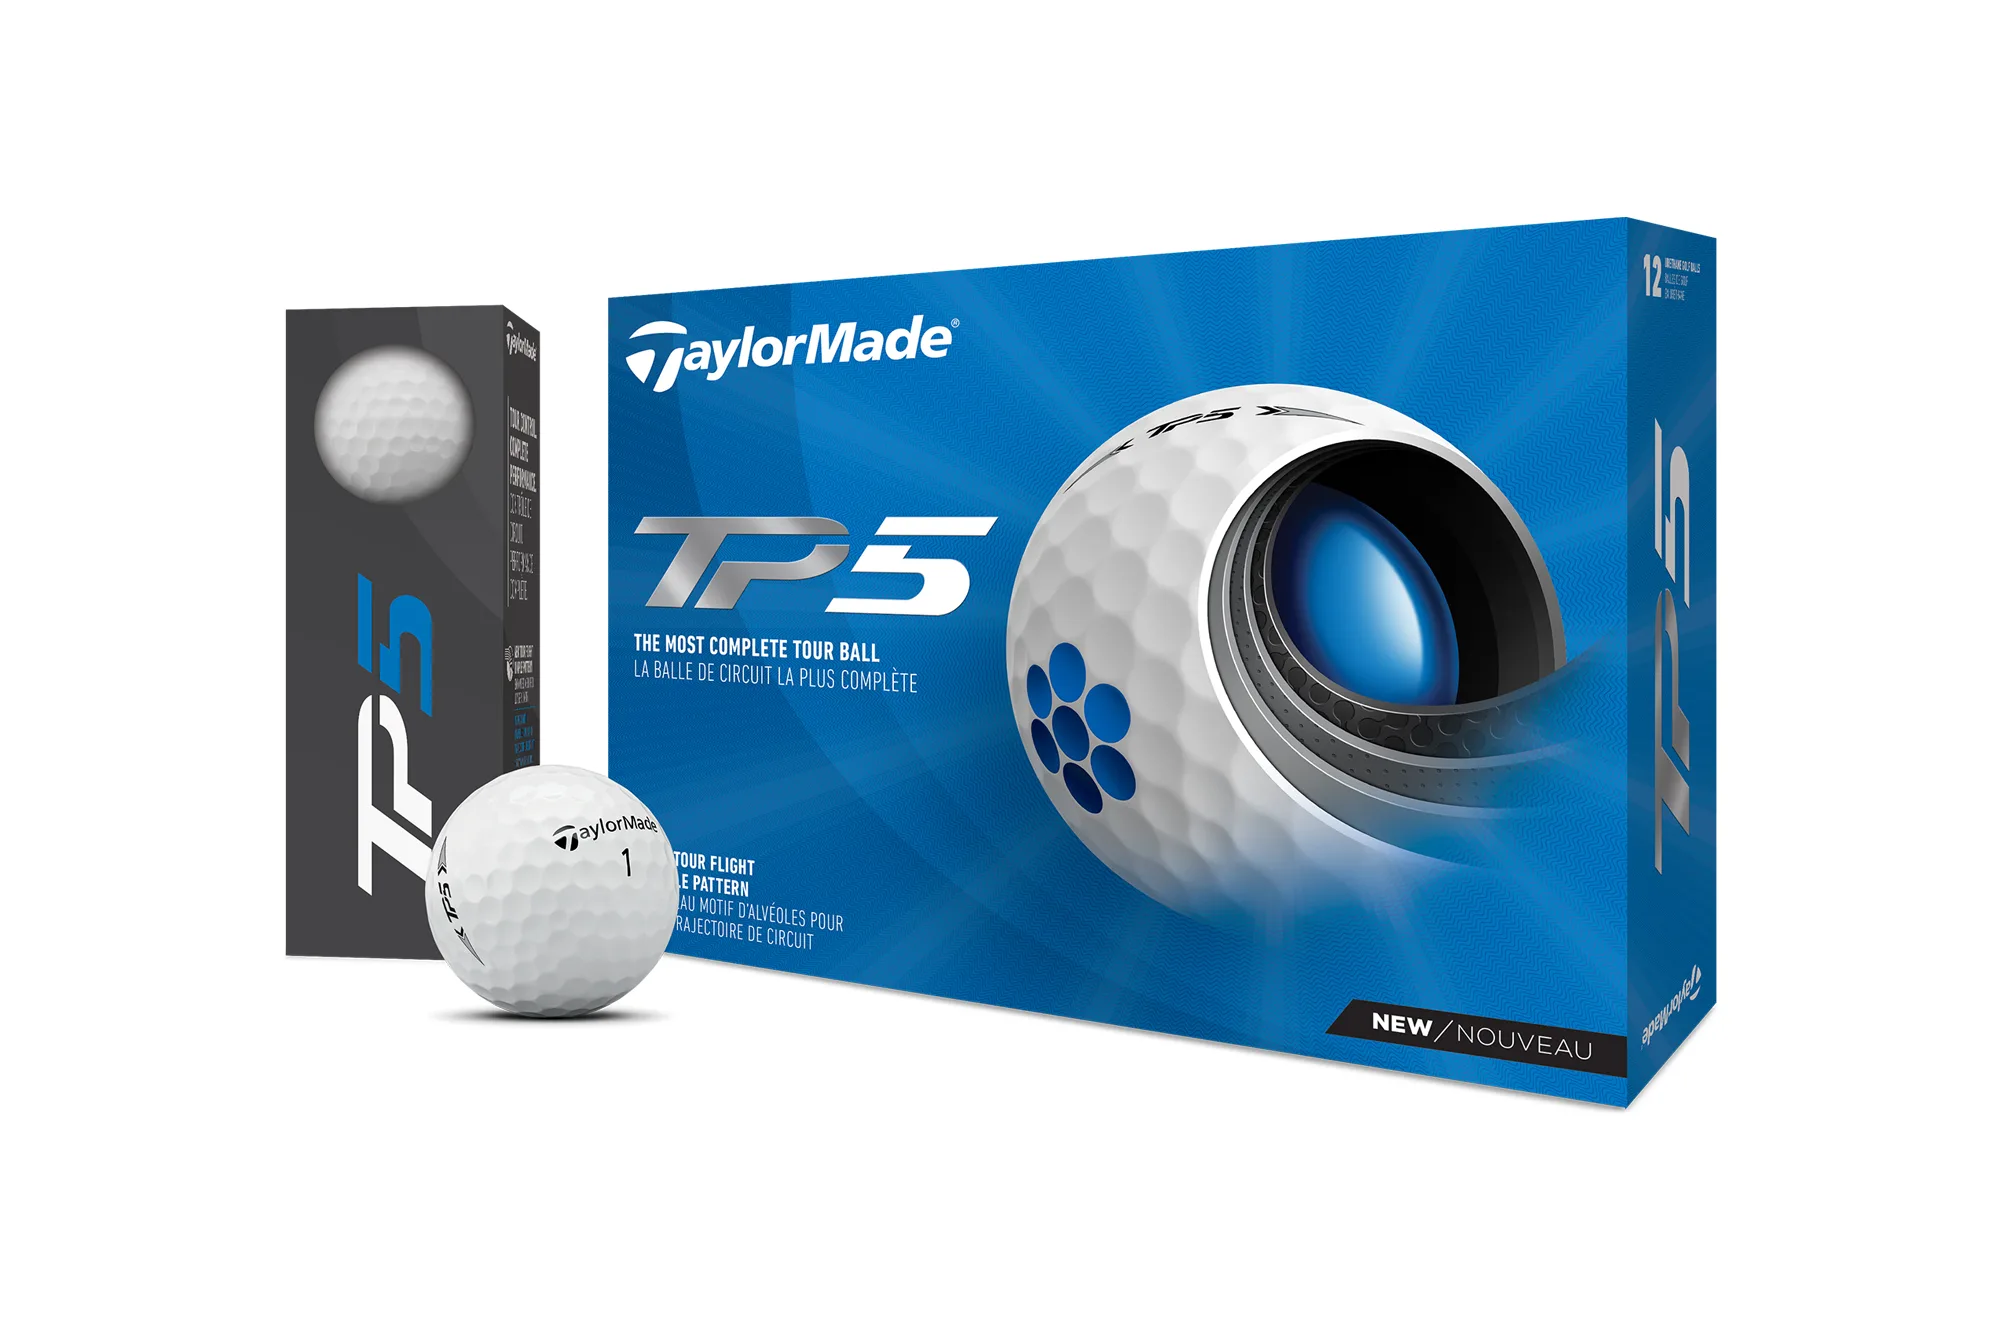 WIN! A year's supply of TaylorMade TP5 golf balls